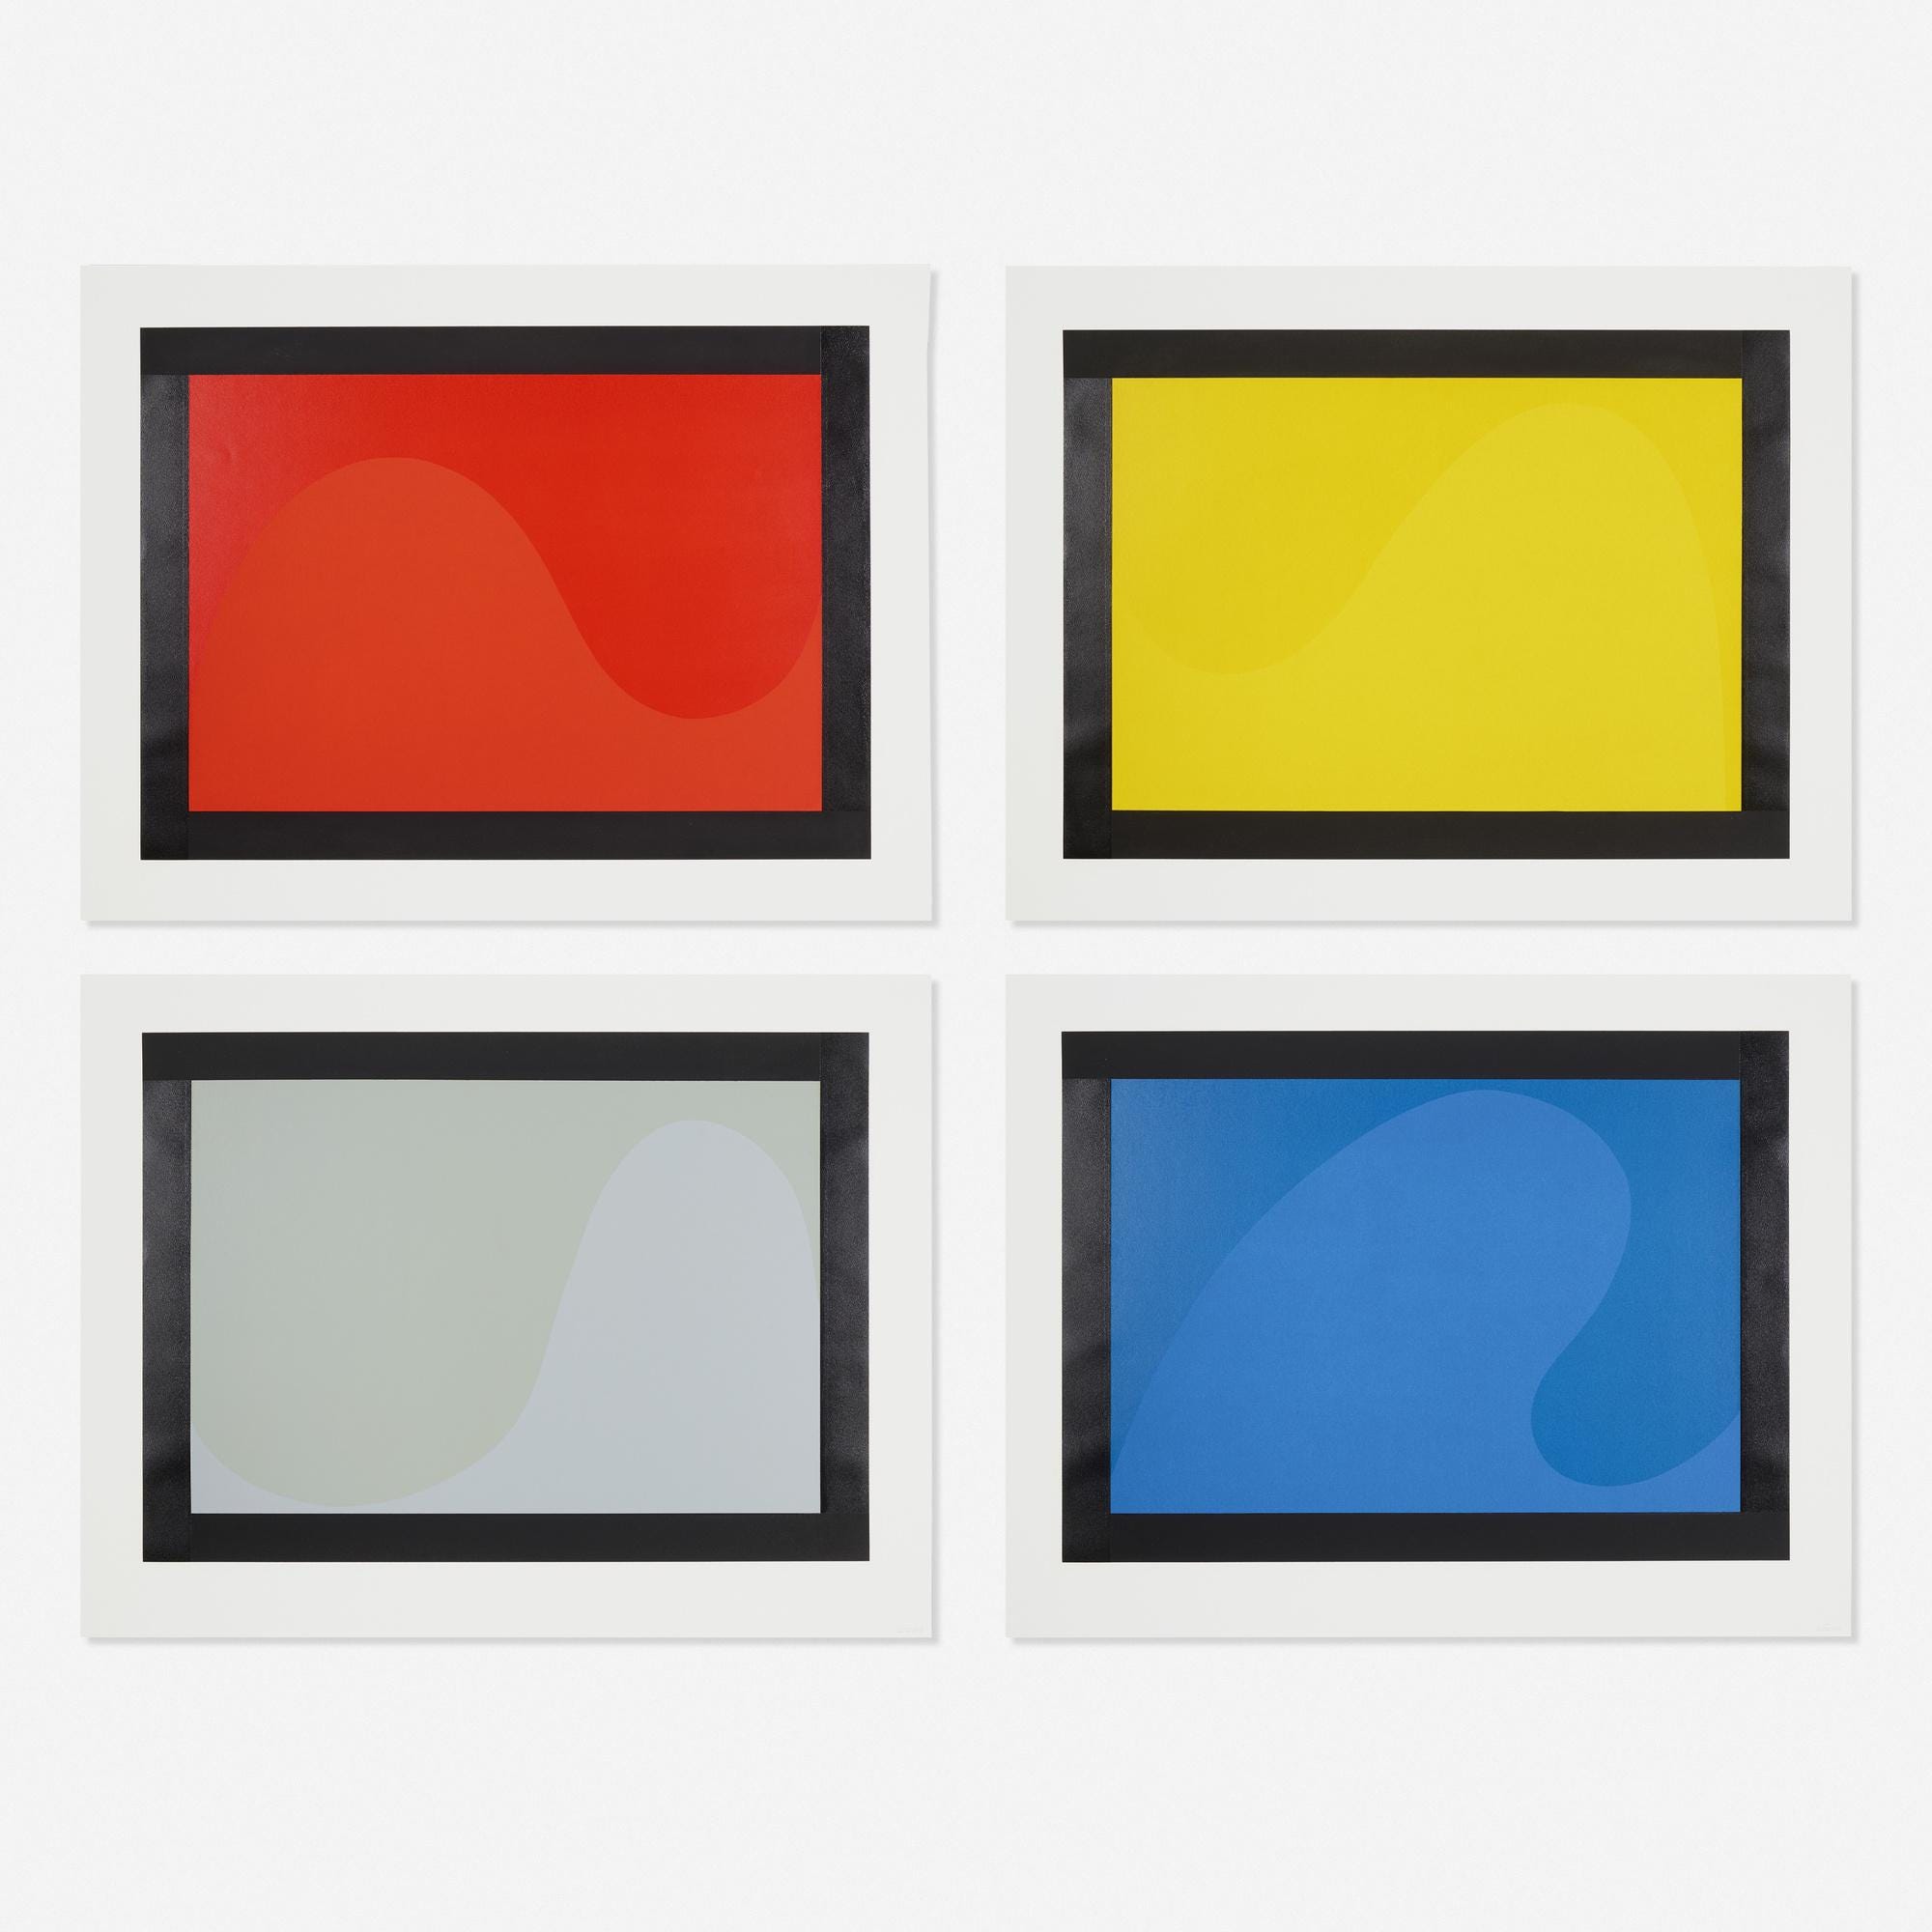 Irregular Forms (Flat and Glossy Colors) with Black Border (E-91, Krakow 1998.02)